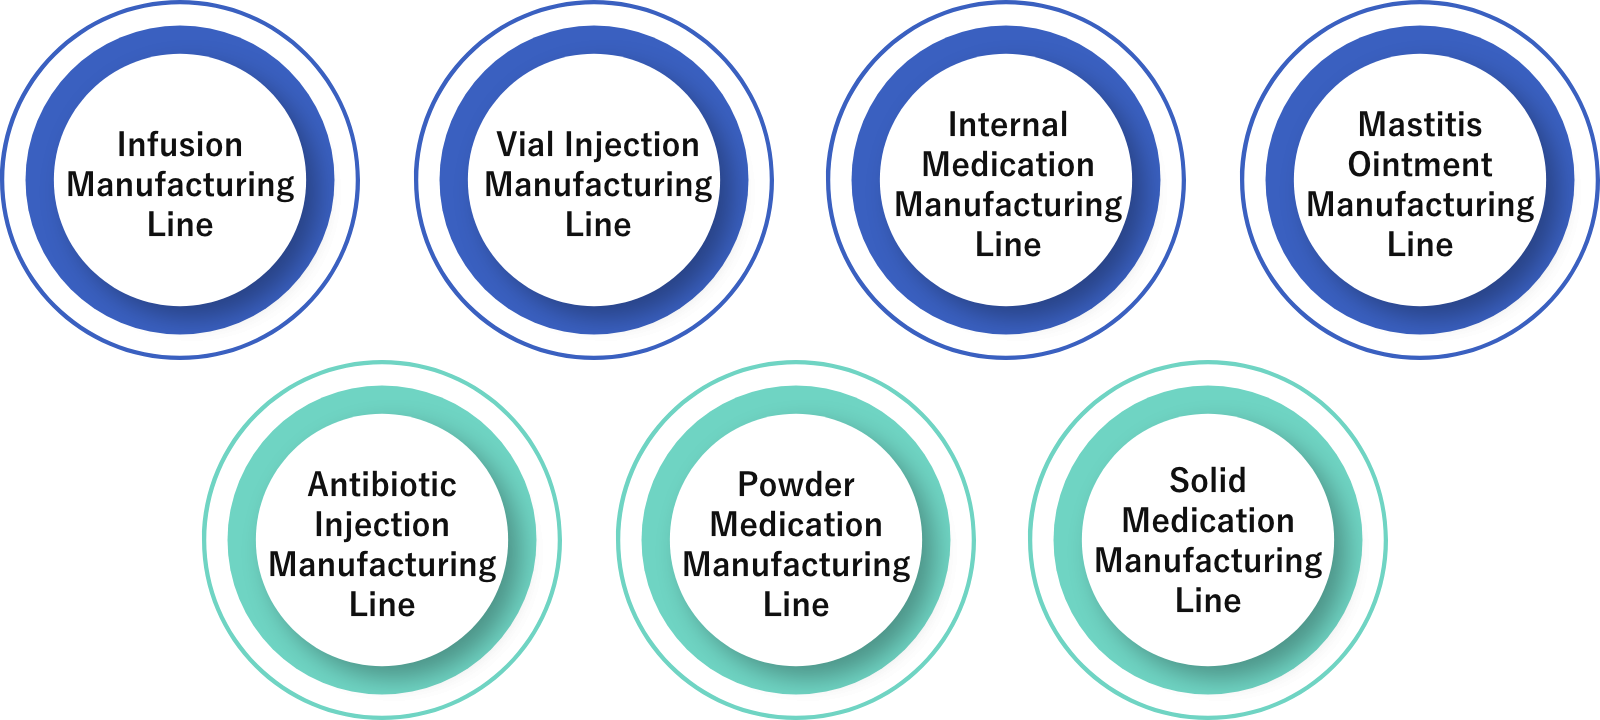 Infusion Manufacturing Line, Vial Injection Manufacturing Line, Internal Medication Manufacturing Line, Mastitis Ointment Manufacturing Line, Antibiotic Injection Manufacturing Line, Powder Medication Manufacturing Line, Solid Medication Manufacturing Line